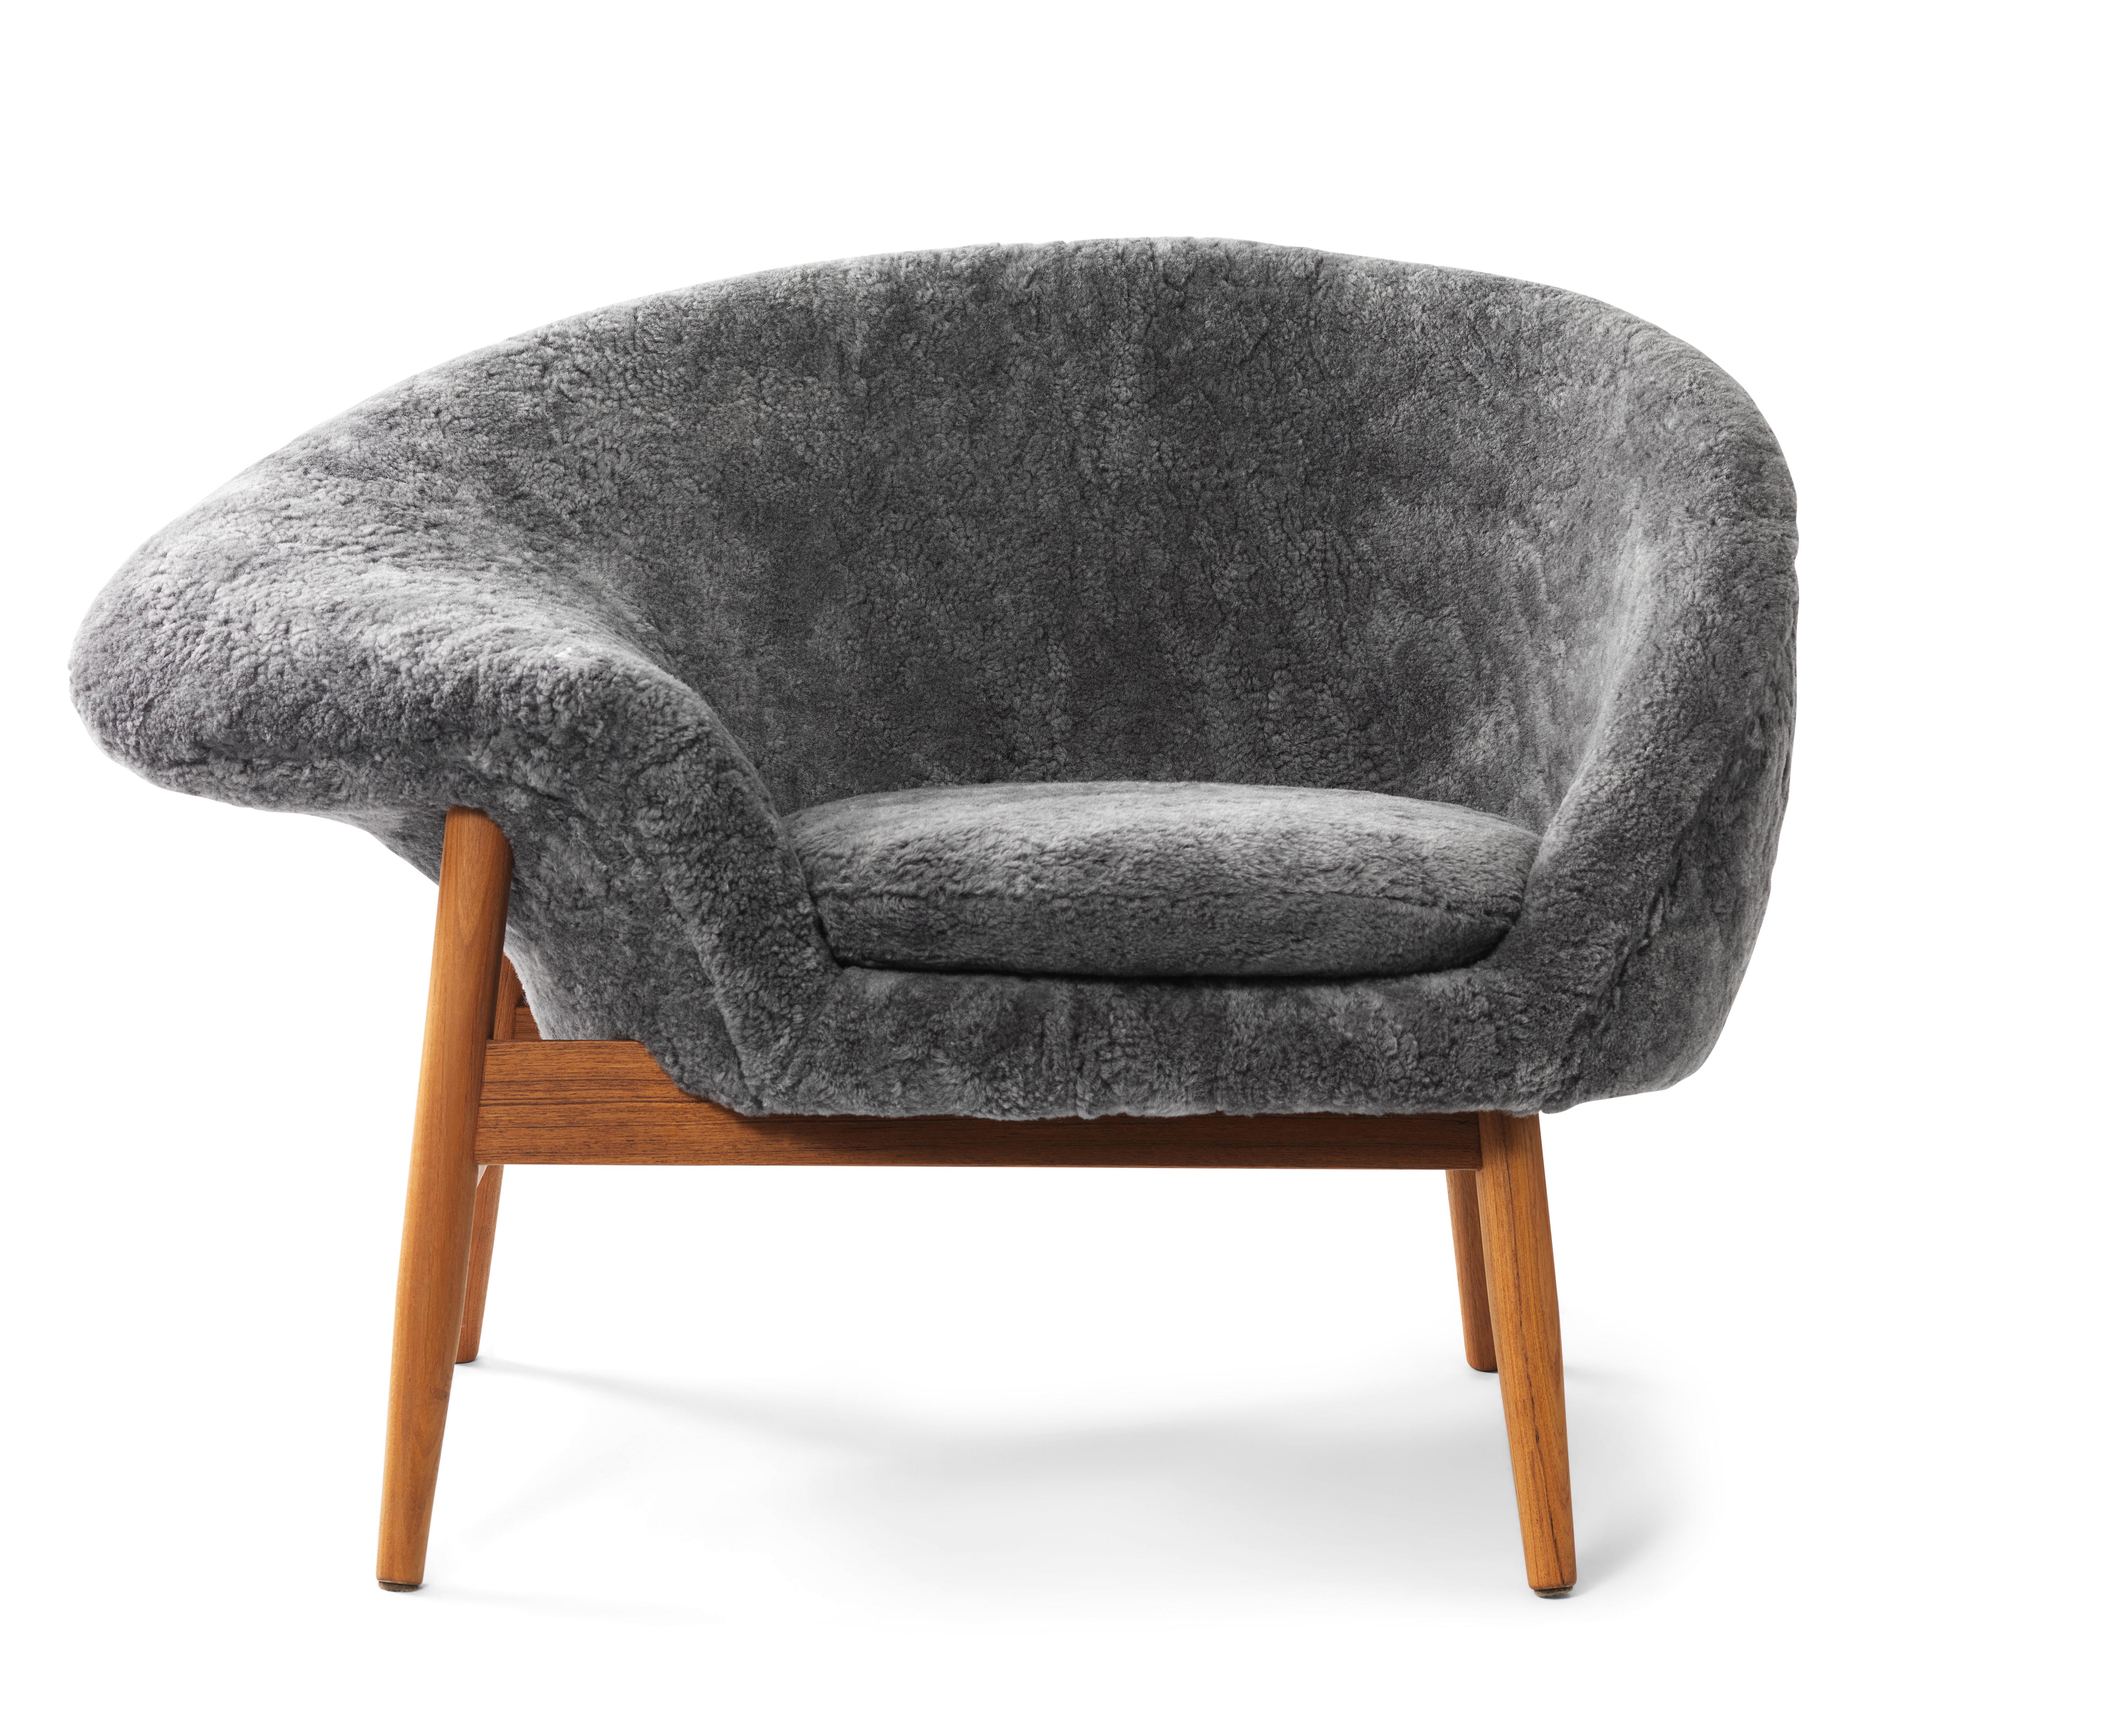 Fried egg left lounge chair sheepskin Scandinavian grey by Warm Nordic
Dimensions: D99 x W68 x H 68 cm
Material: sheepskin, textile or nubuck upholstery, solid oiled teak
Weight: 25 kg
Also available in different colours and finishes. 

A